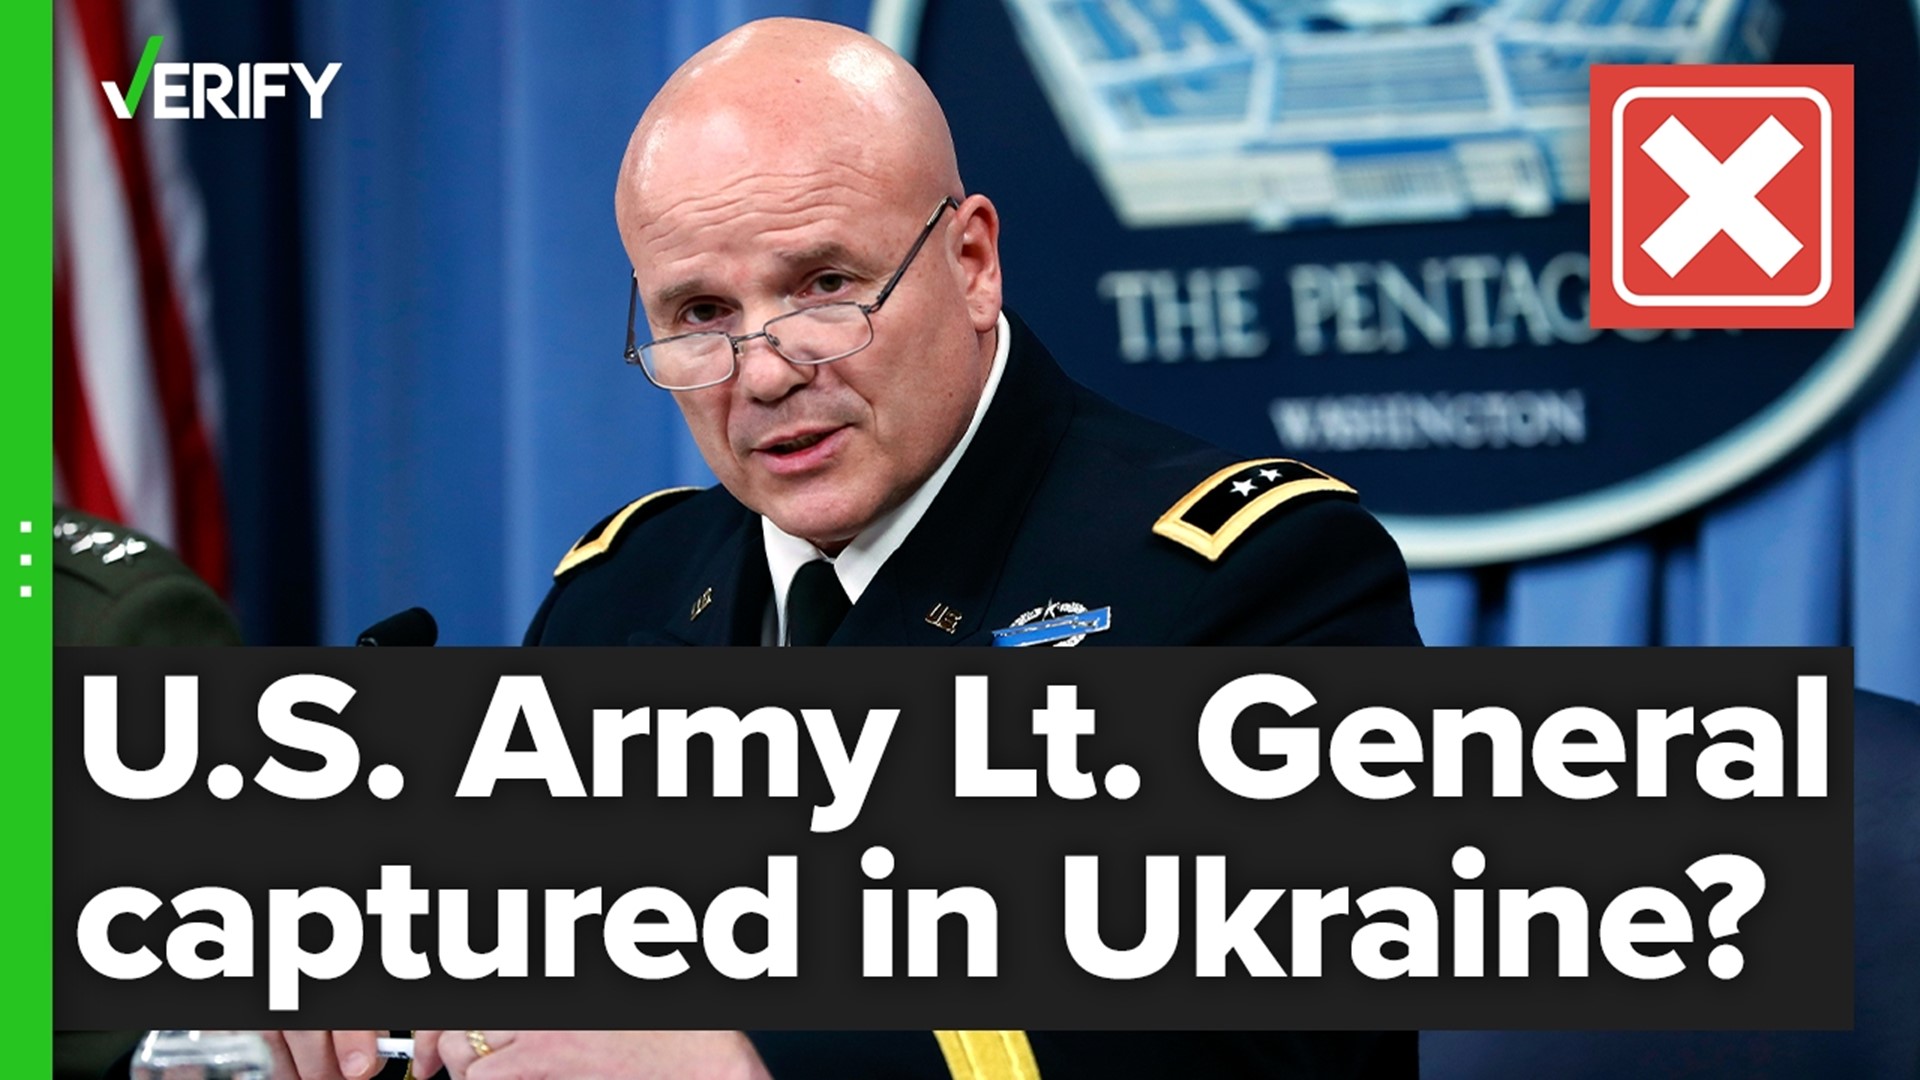 Was U.S. Army Lieutenant General Roger Cloutier captured in Ukraine by the Russian Army?